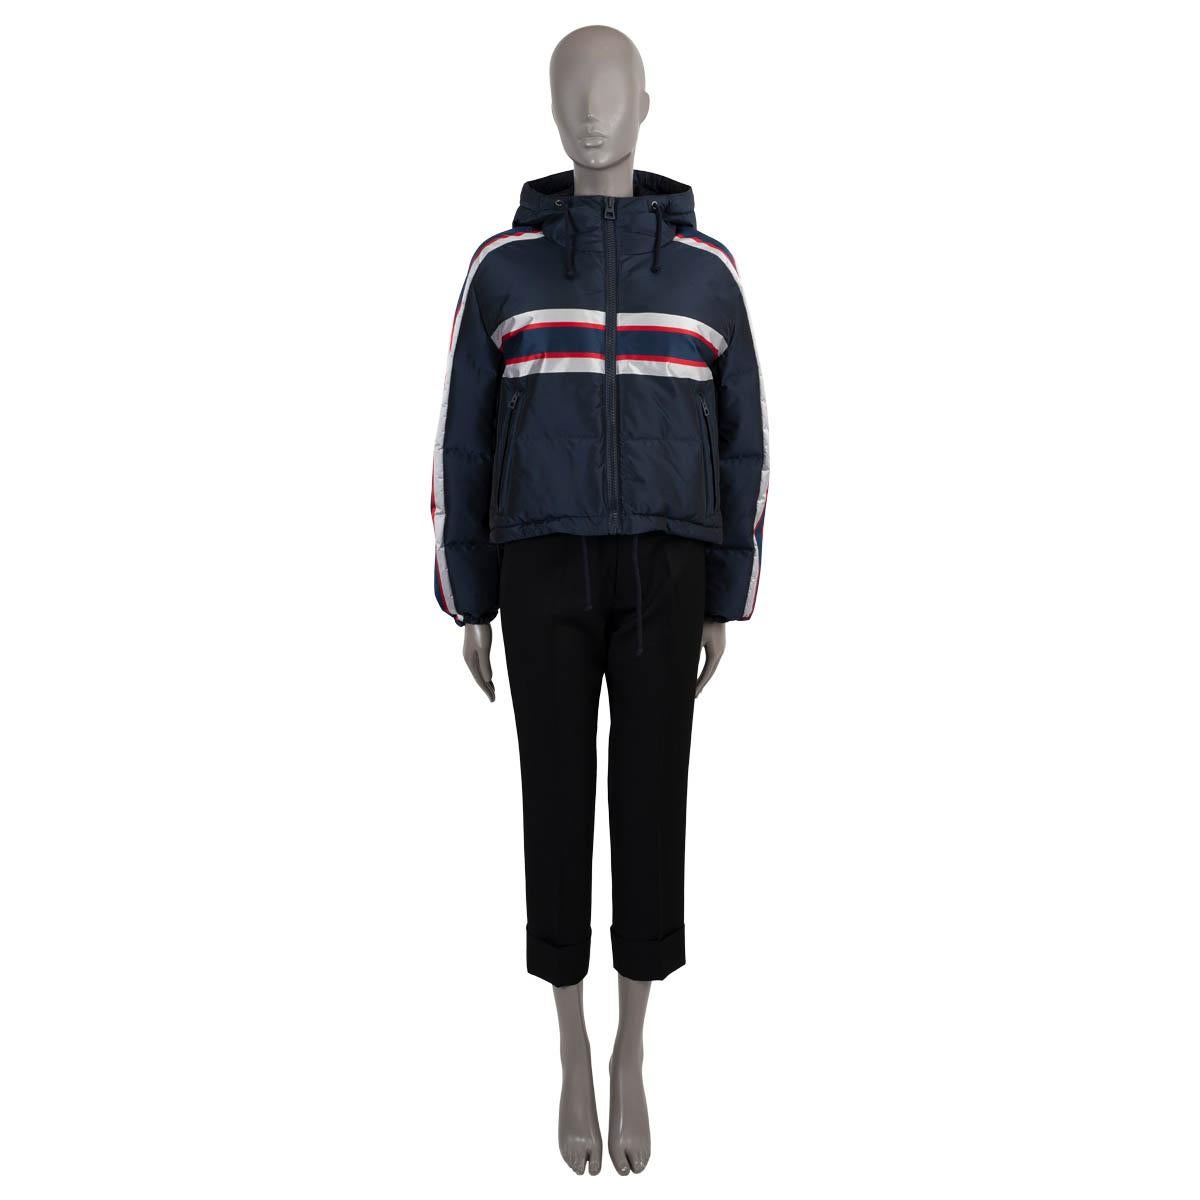 100% authentic Christian Dior hooded down puffer jacket in navy blue technical taffeta (100% polyester). Features stripe details in silver and red and Star motif on the back. The waterproof style, ideal for skiing, has a windproof membrane, interior